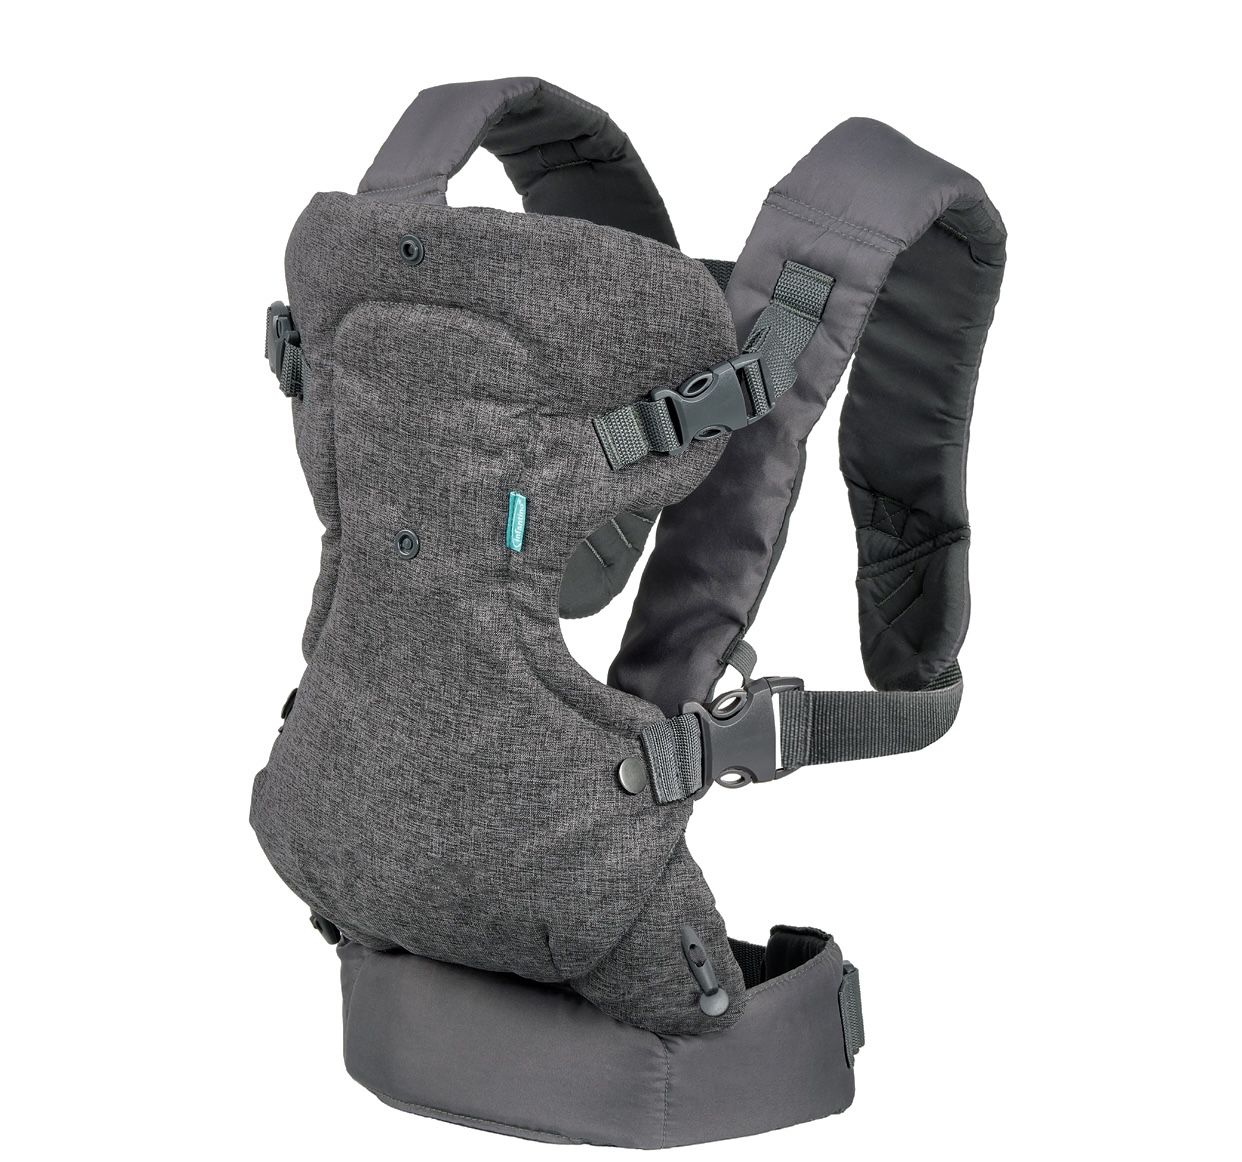 Infantino 4 in 1 Baby Carrier 